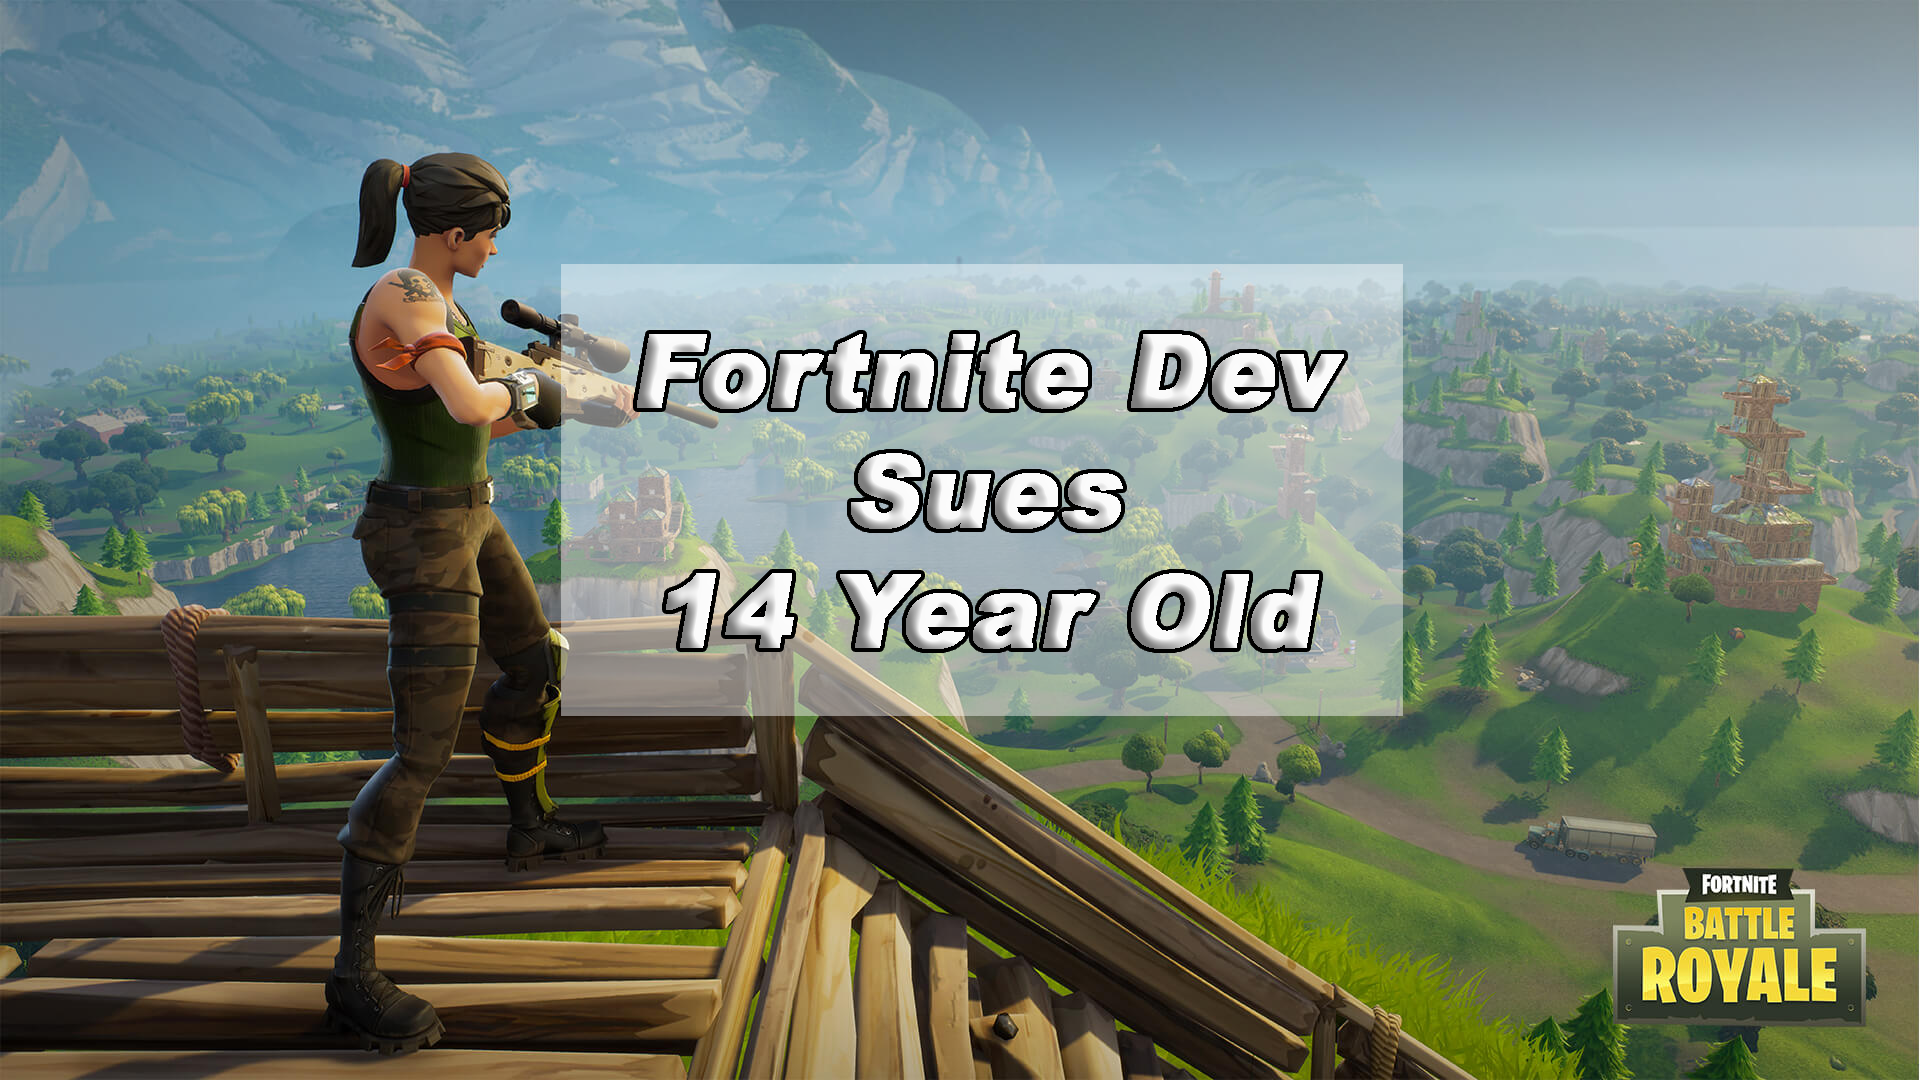 Fortnite Battle Royale Dev Sues 14 Year Old in Anti ... - 1920 x 1080 png 1854kB